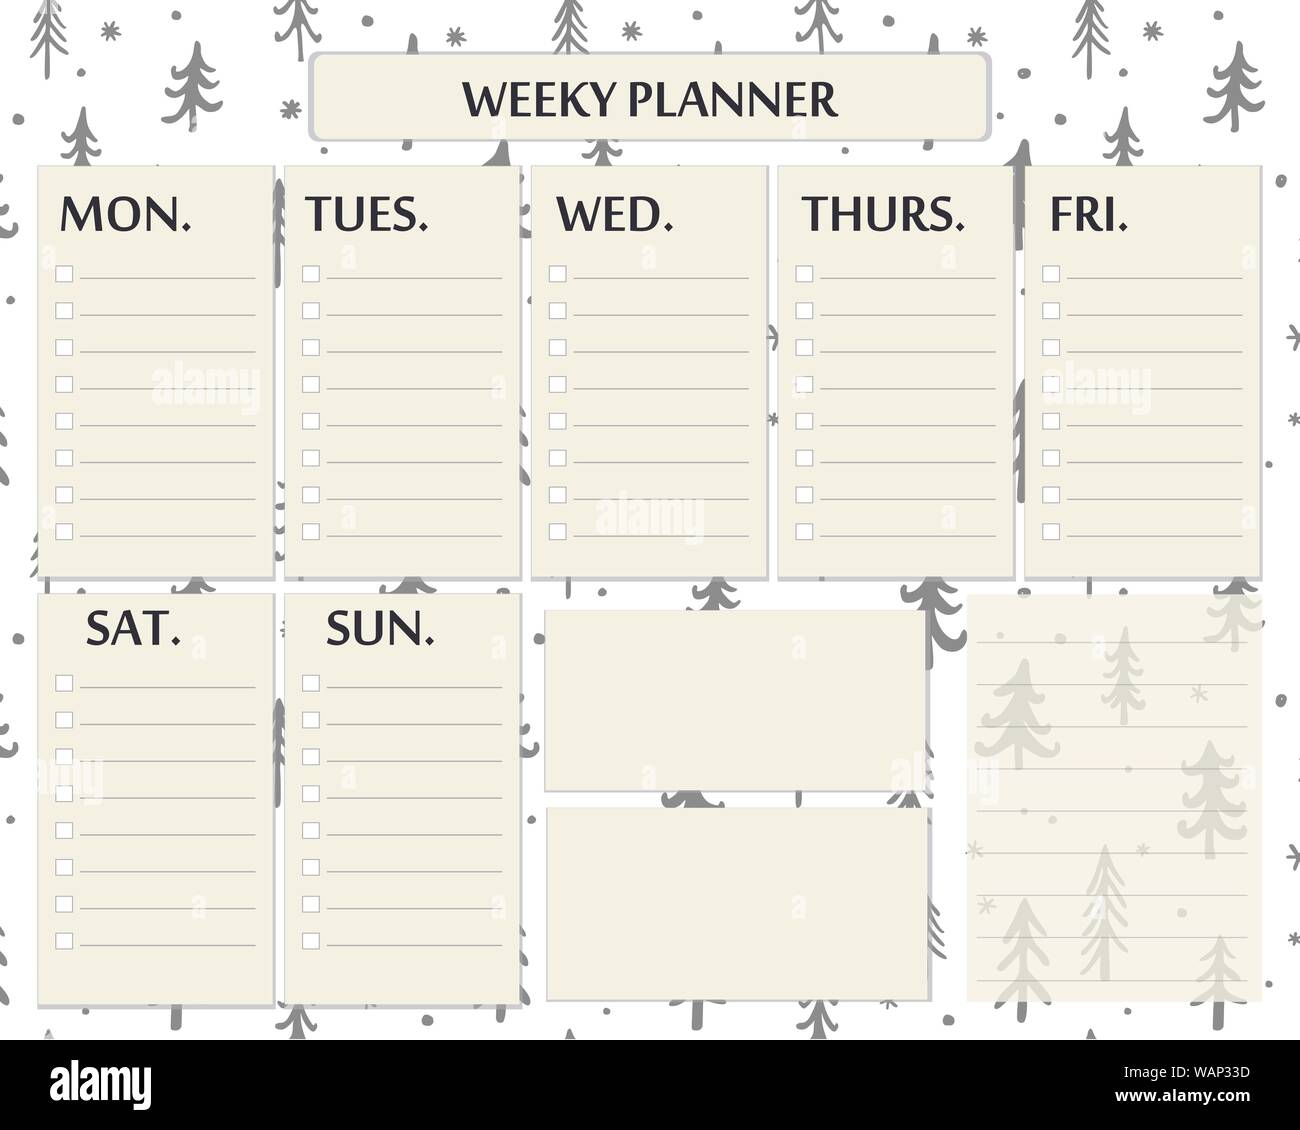 cute daily planner template